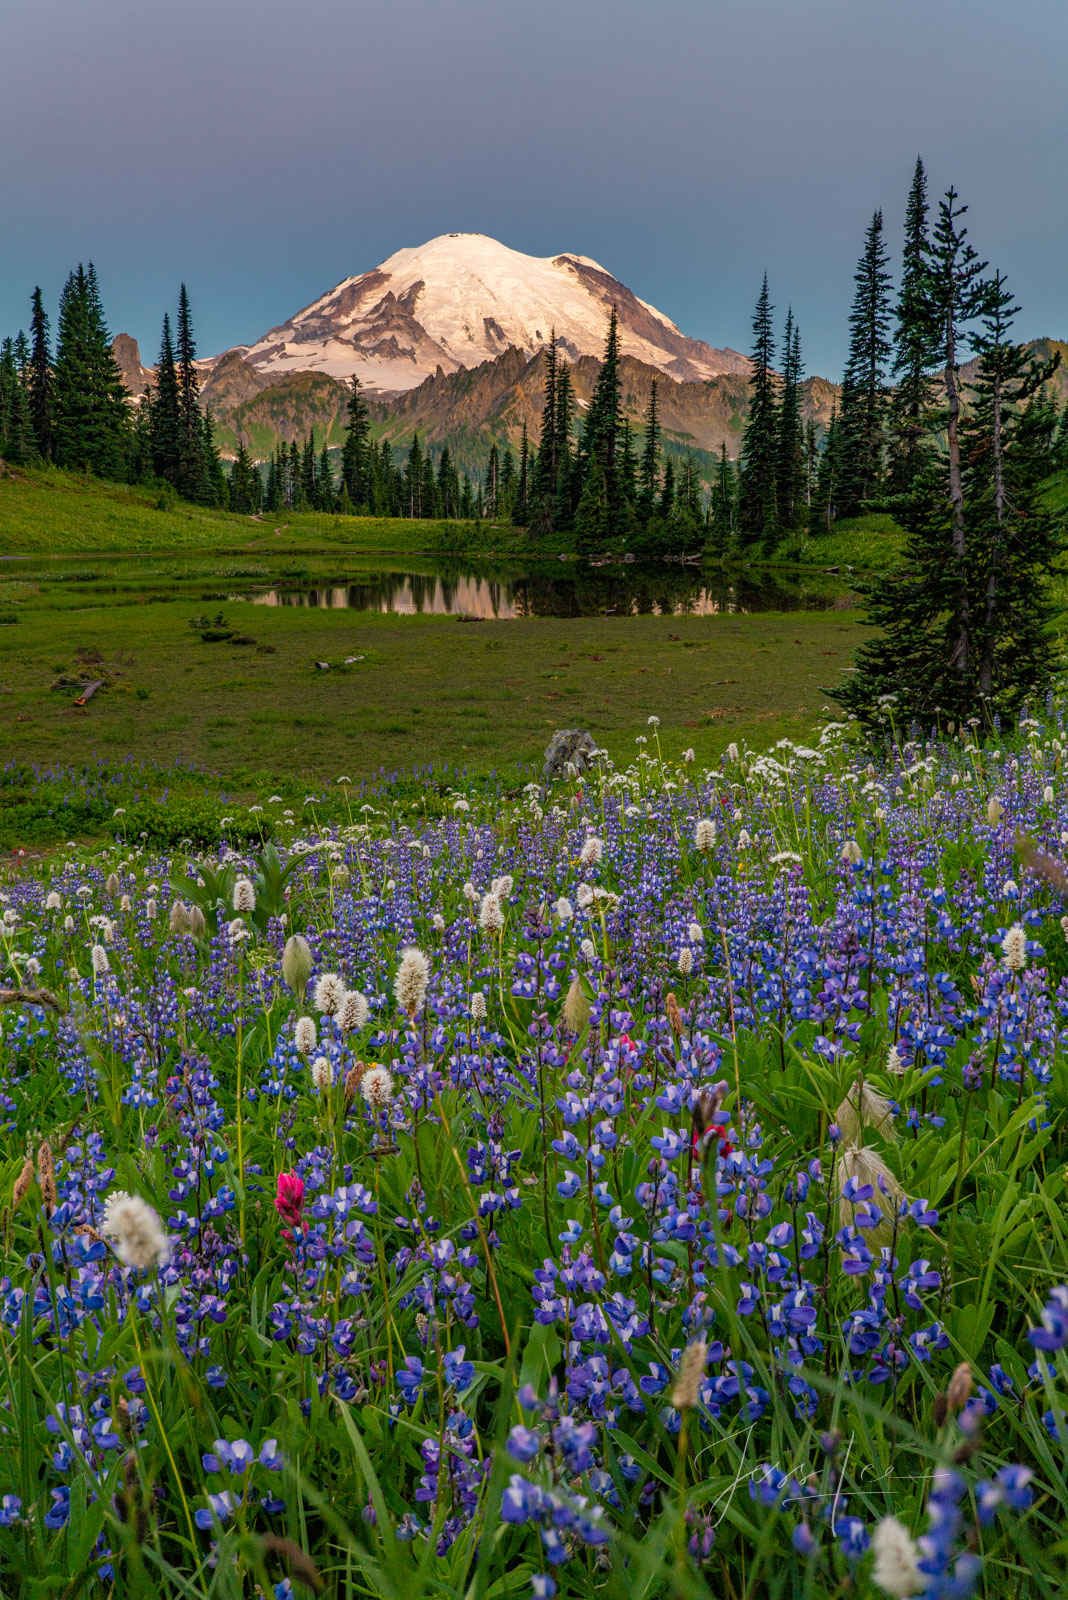 Mount Rainer Photograph Fine Art Print of summer flowers blue color and snow capped mountain photo.